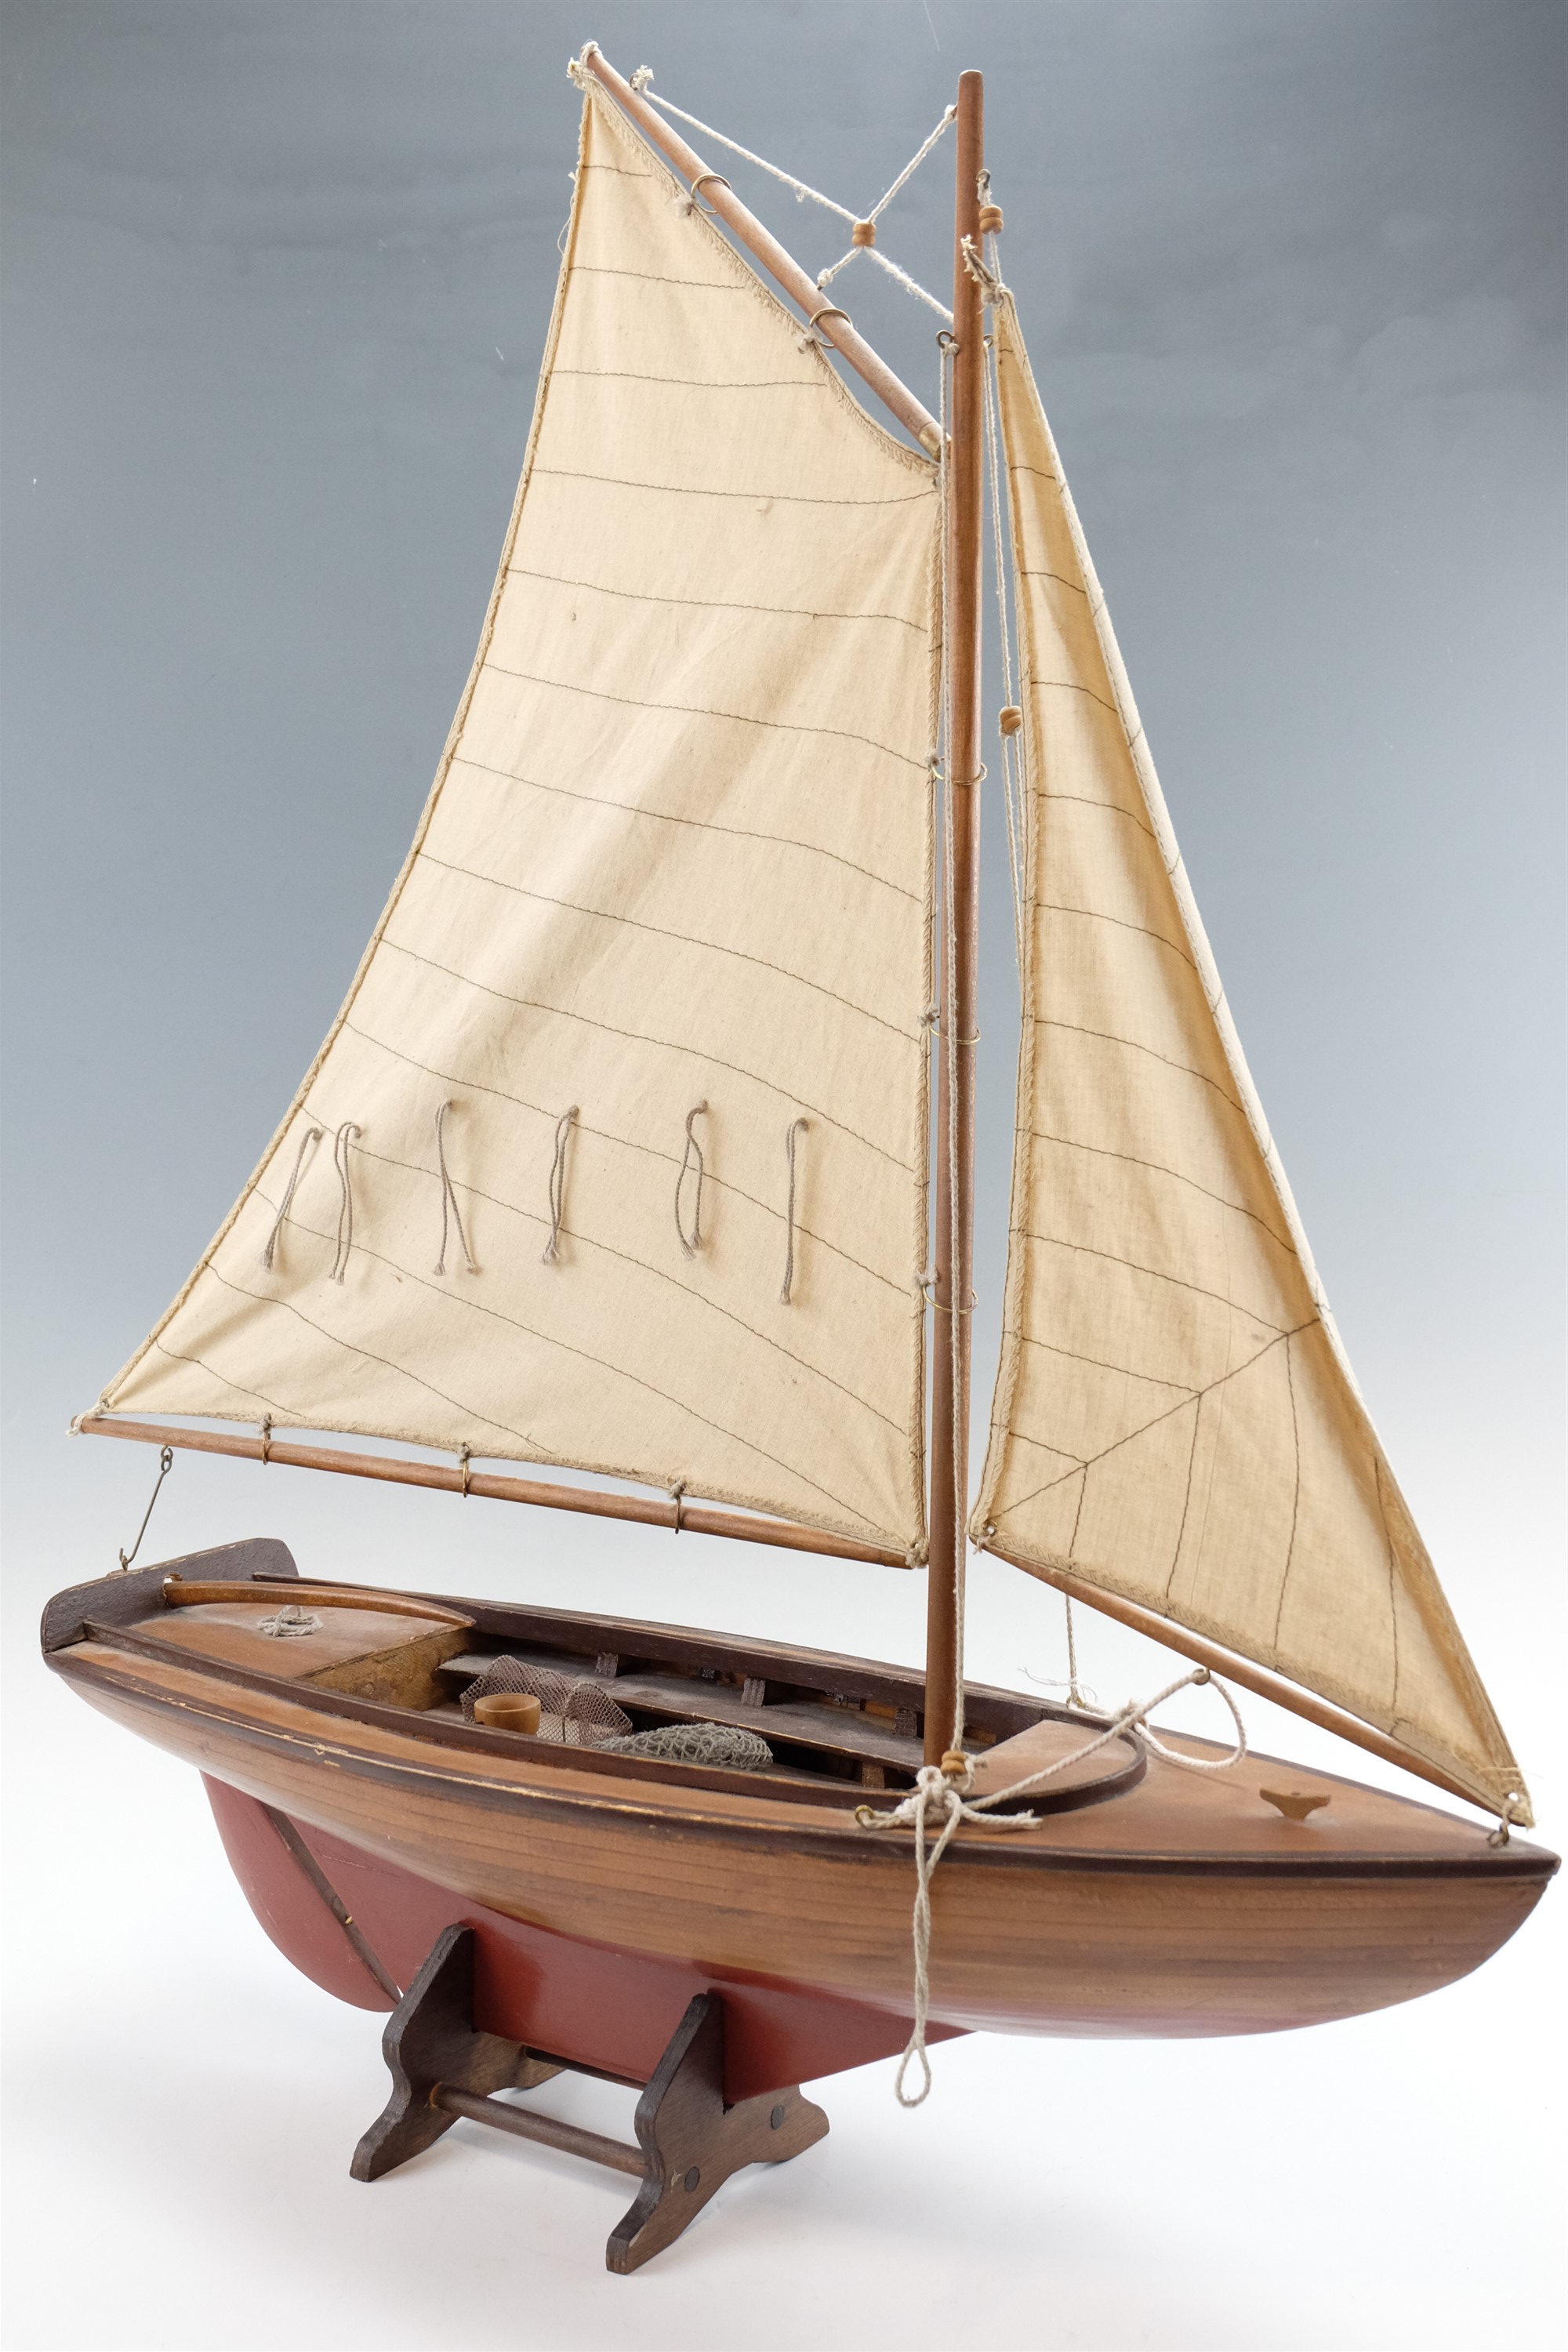 An early to mid 20th Century wooden model gaff rigged fishing boat / pond yacht, of carvel plank